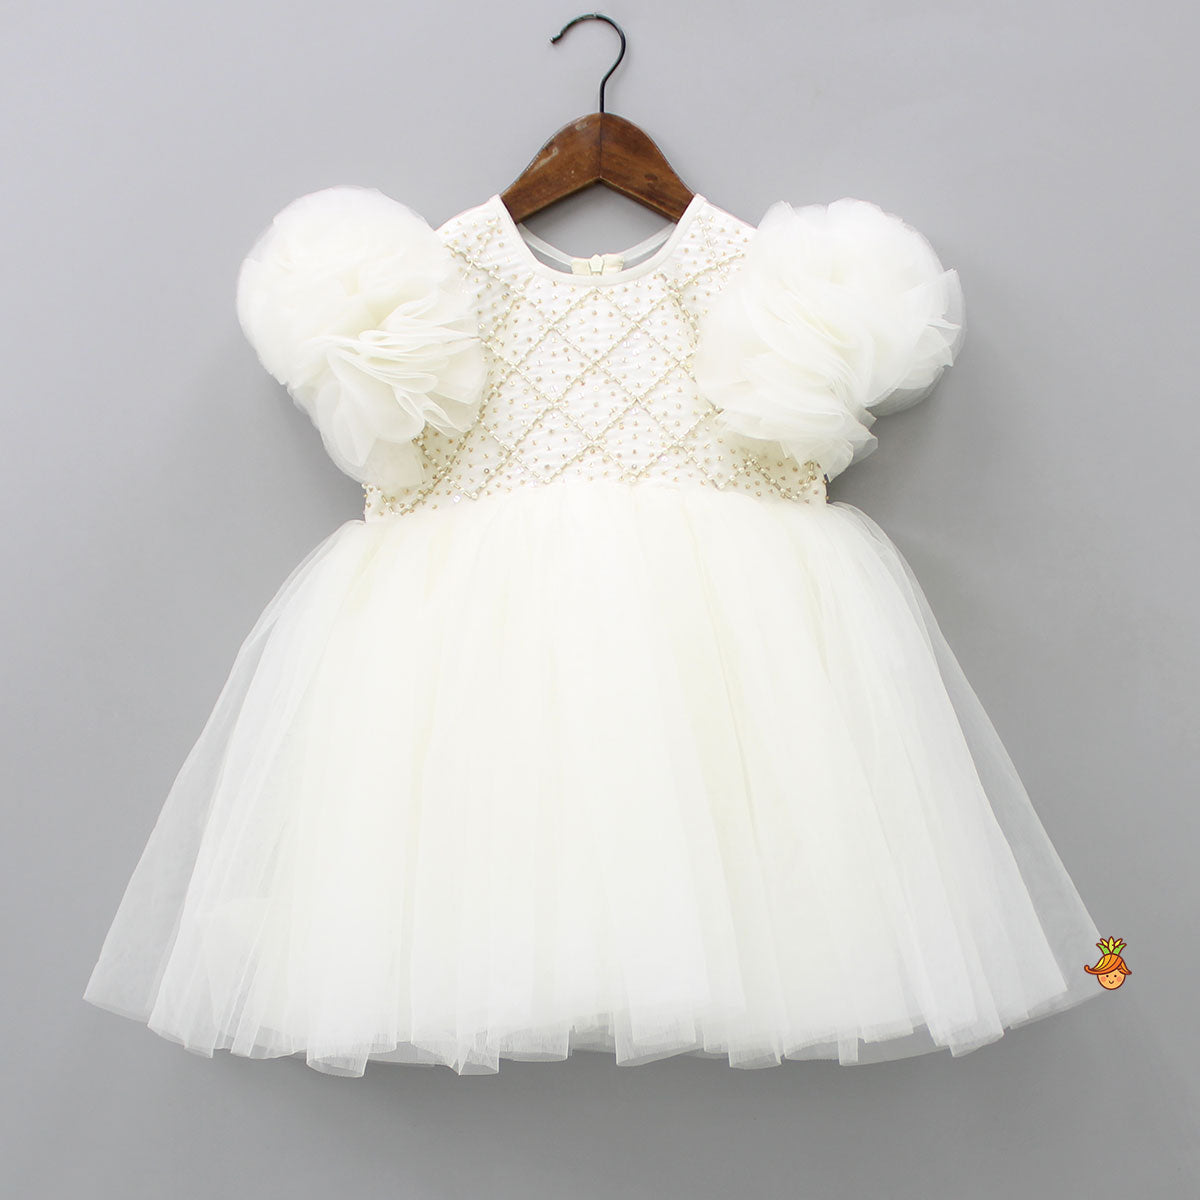 Checks Embroidered Yoke Off White Dress With Back Sequined Bow